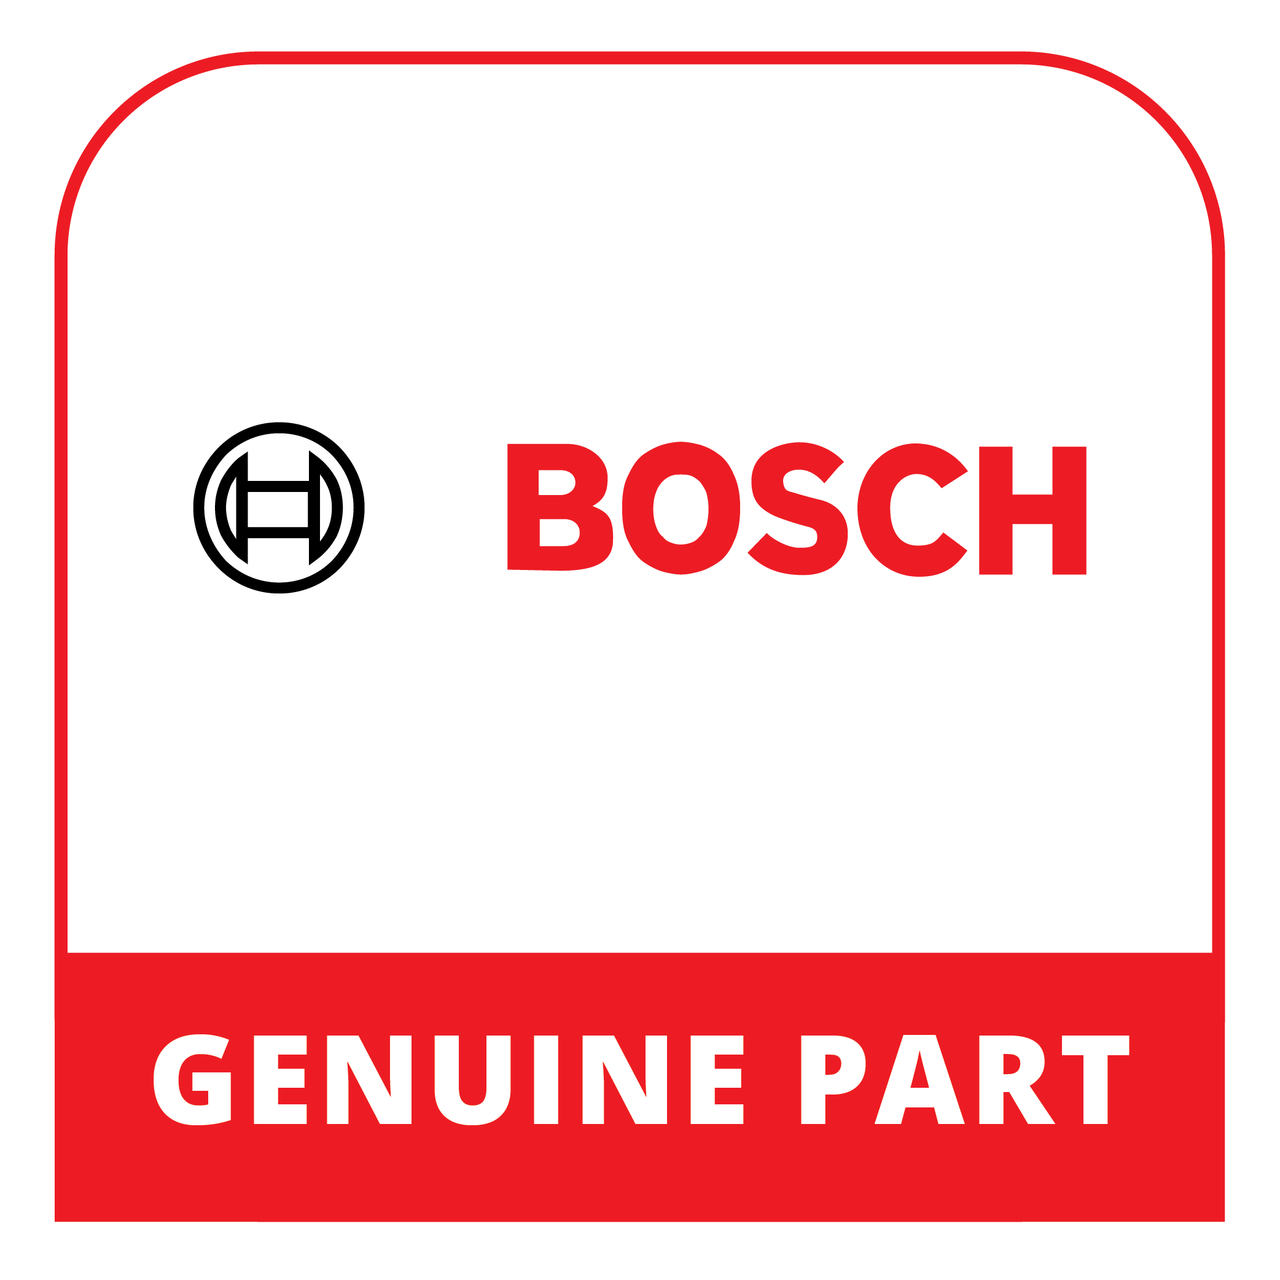 Bosch (Thermador) 12023717 - Drive - Genuine Bosch (Thermador) Part